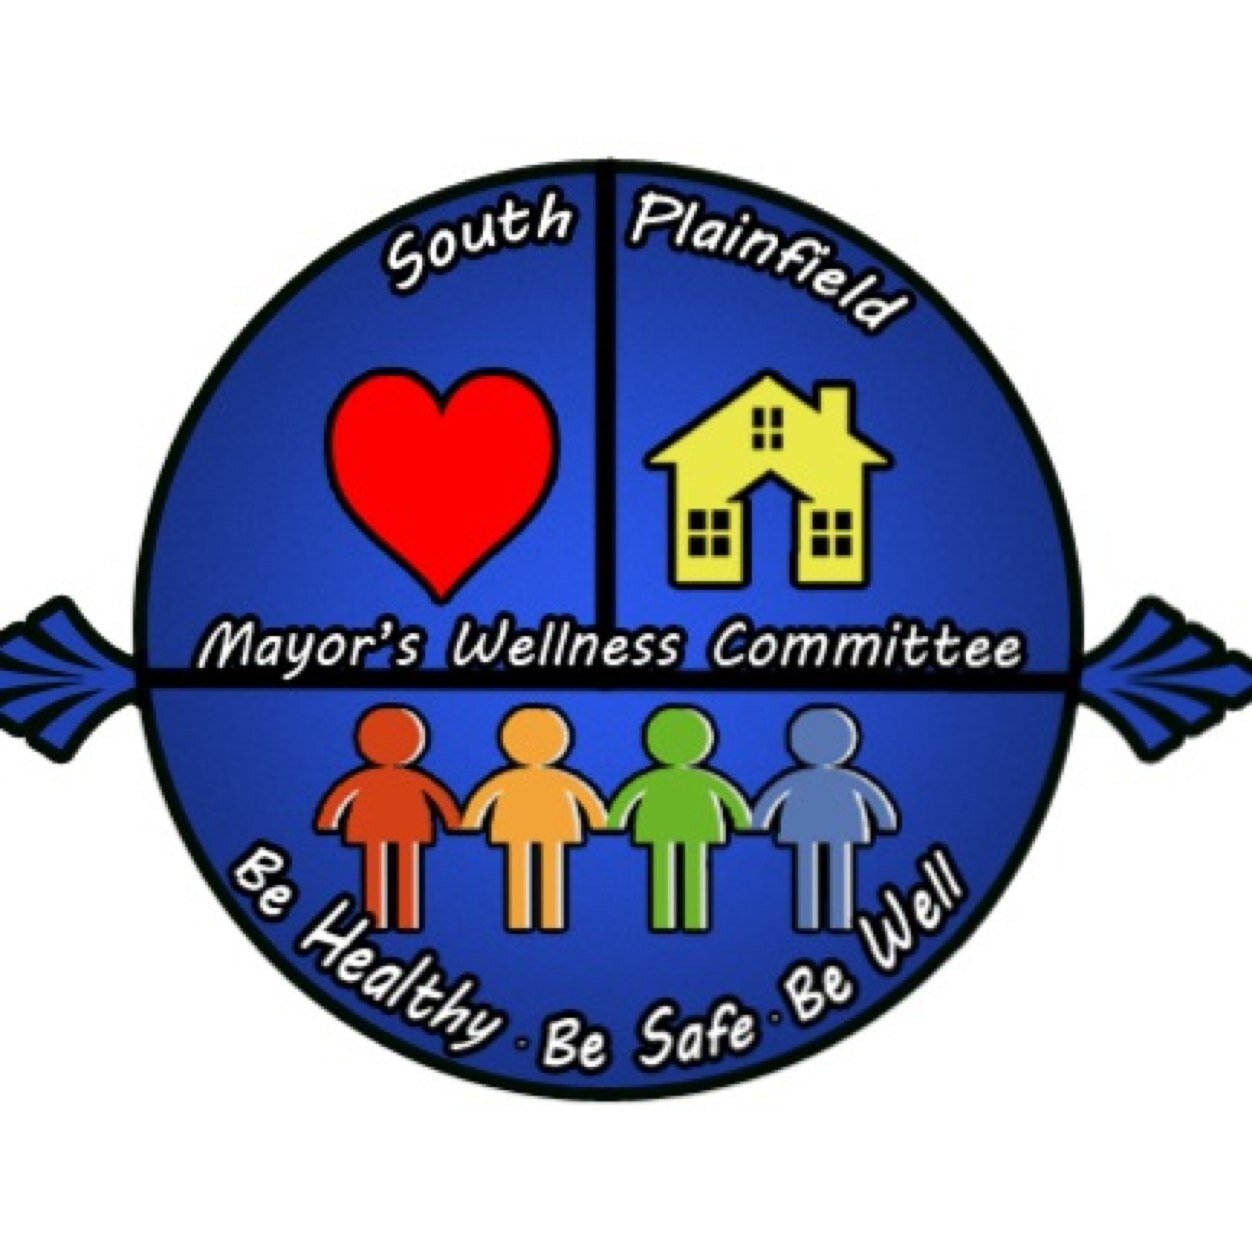 Official Twitter Page for the Borough of South Plainfield NJ